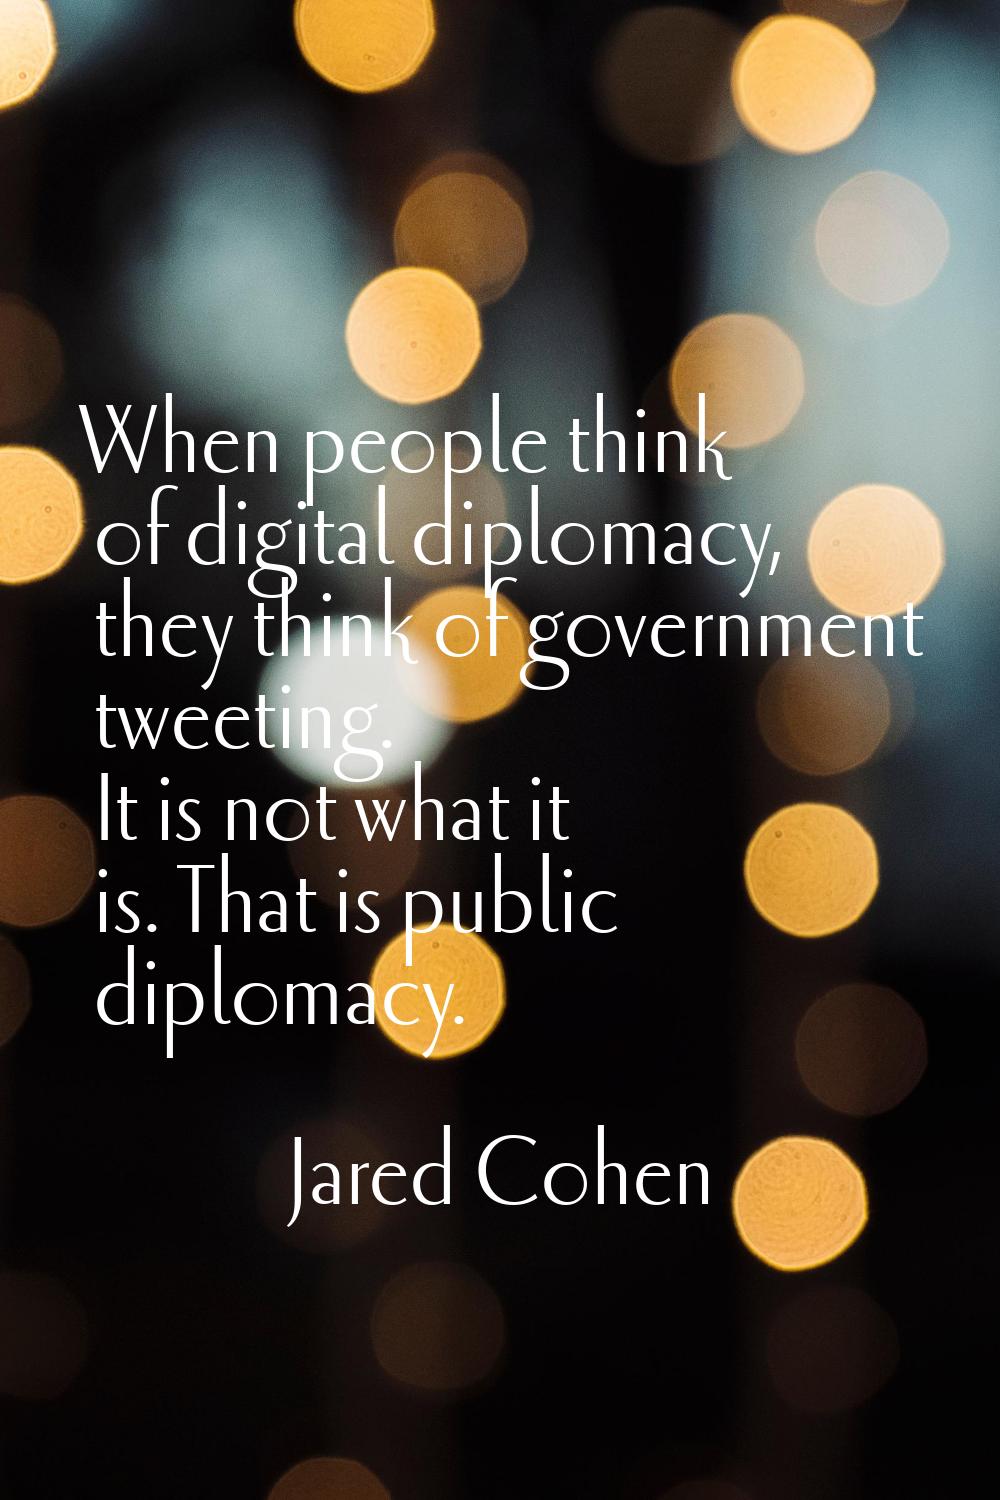 When people think of digital diplomacy, they think of government tweeting. It is not what it is. Th